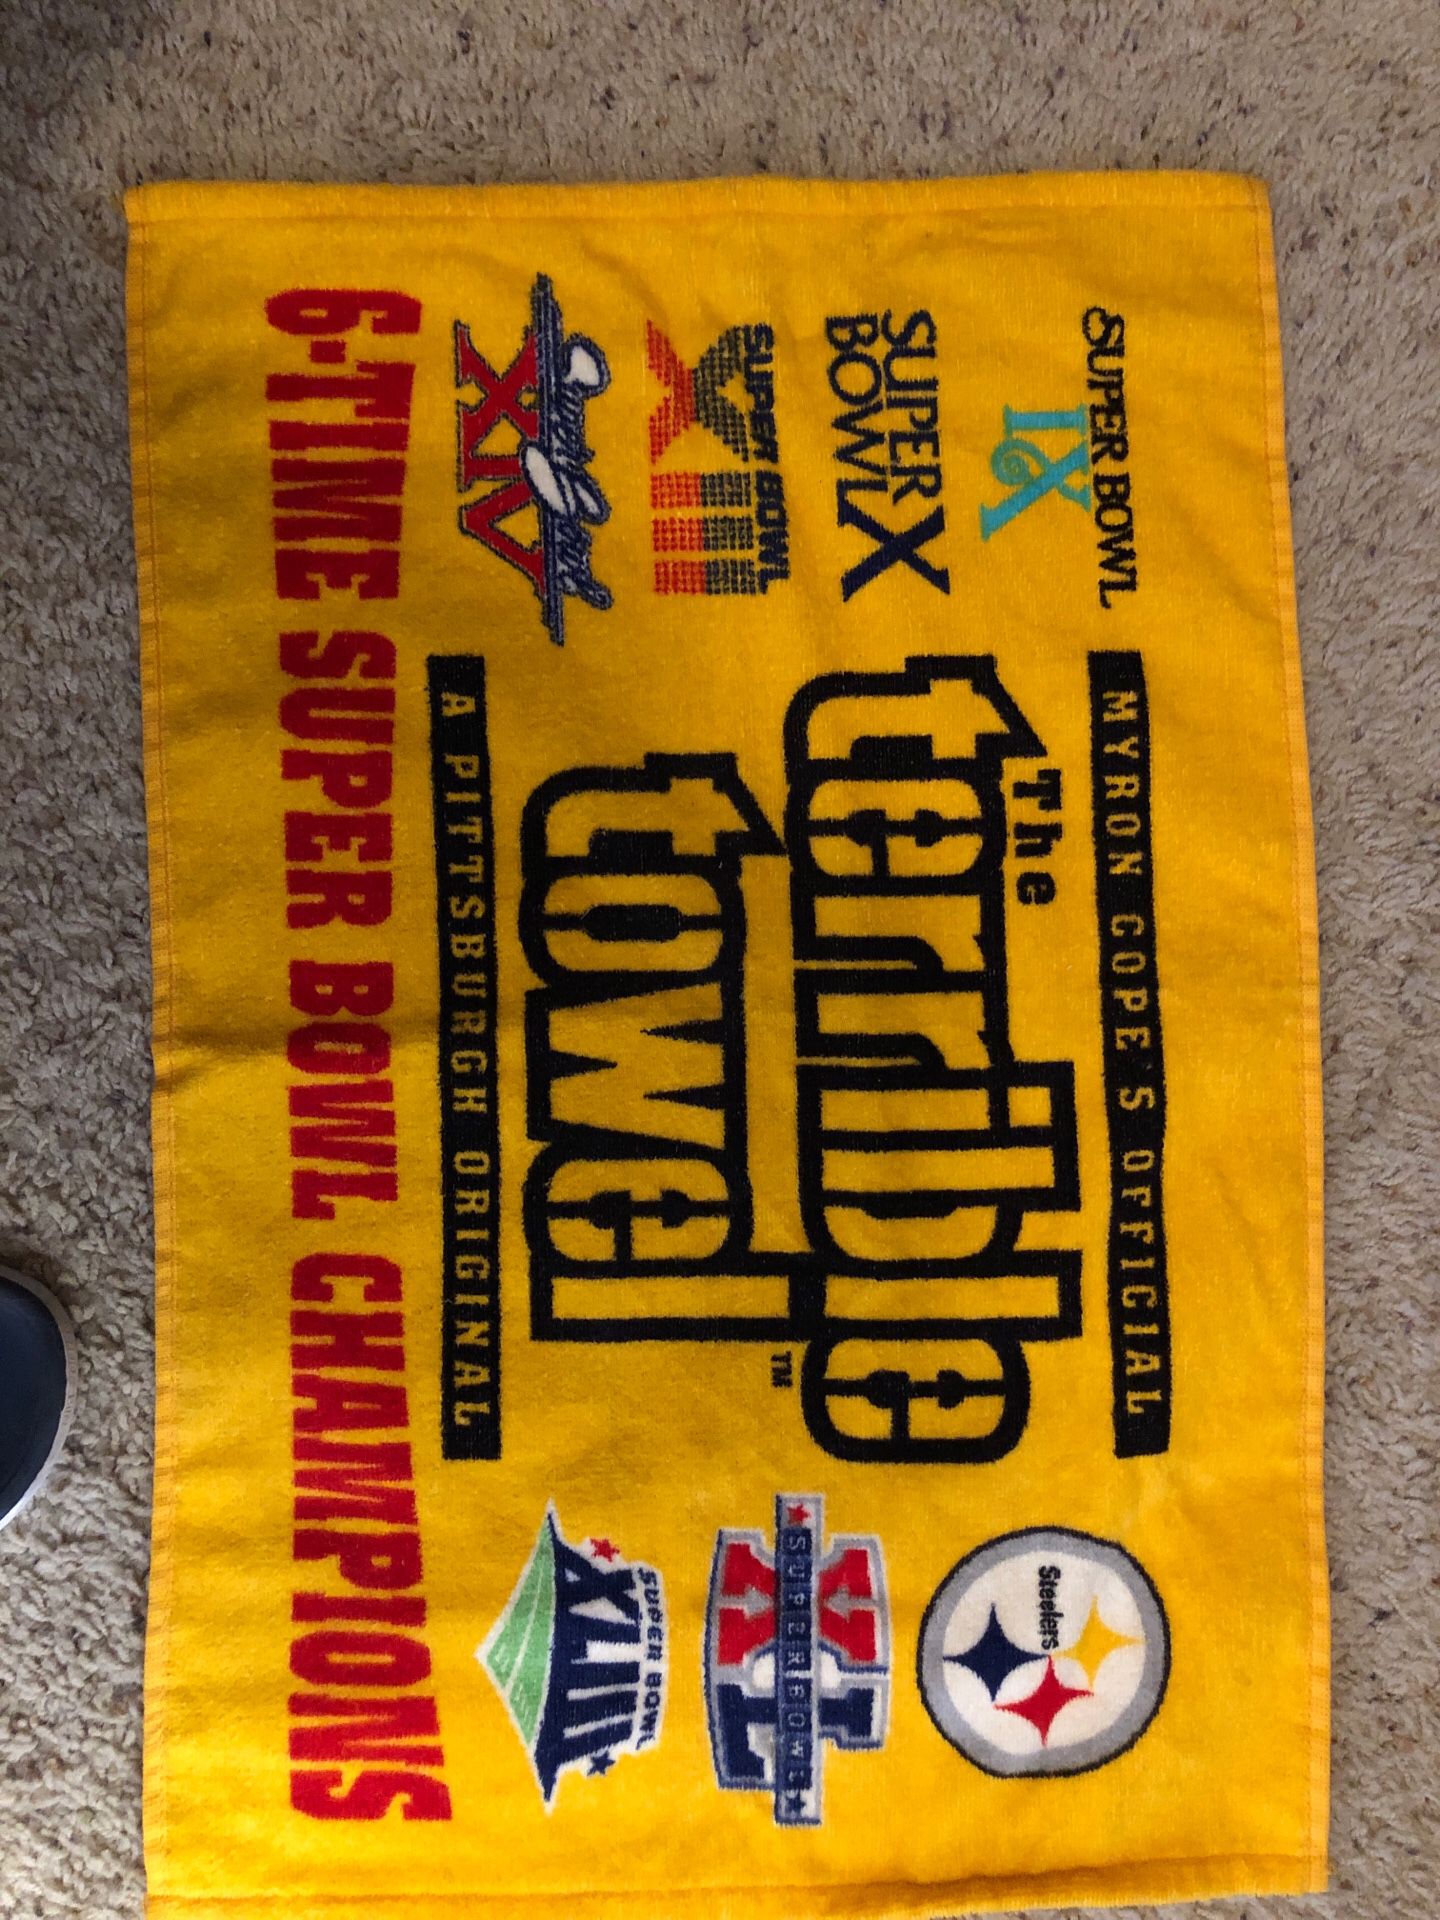 Brand New! THE MYRON COPE OFFICIAL PITTSBURGH STEELERS TERRIBLE TOWEL LIMITED EDITION SUPER BOWEL EDITION 6-Time Super Bowl Champs NFL Football